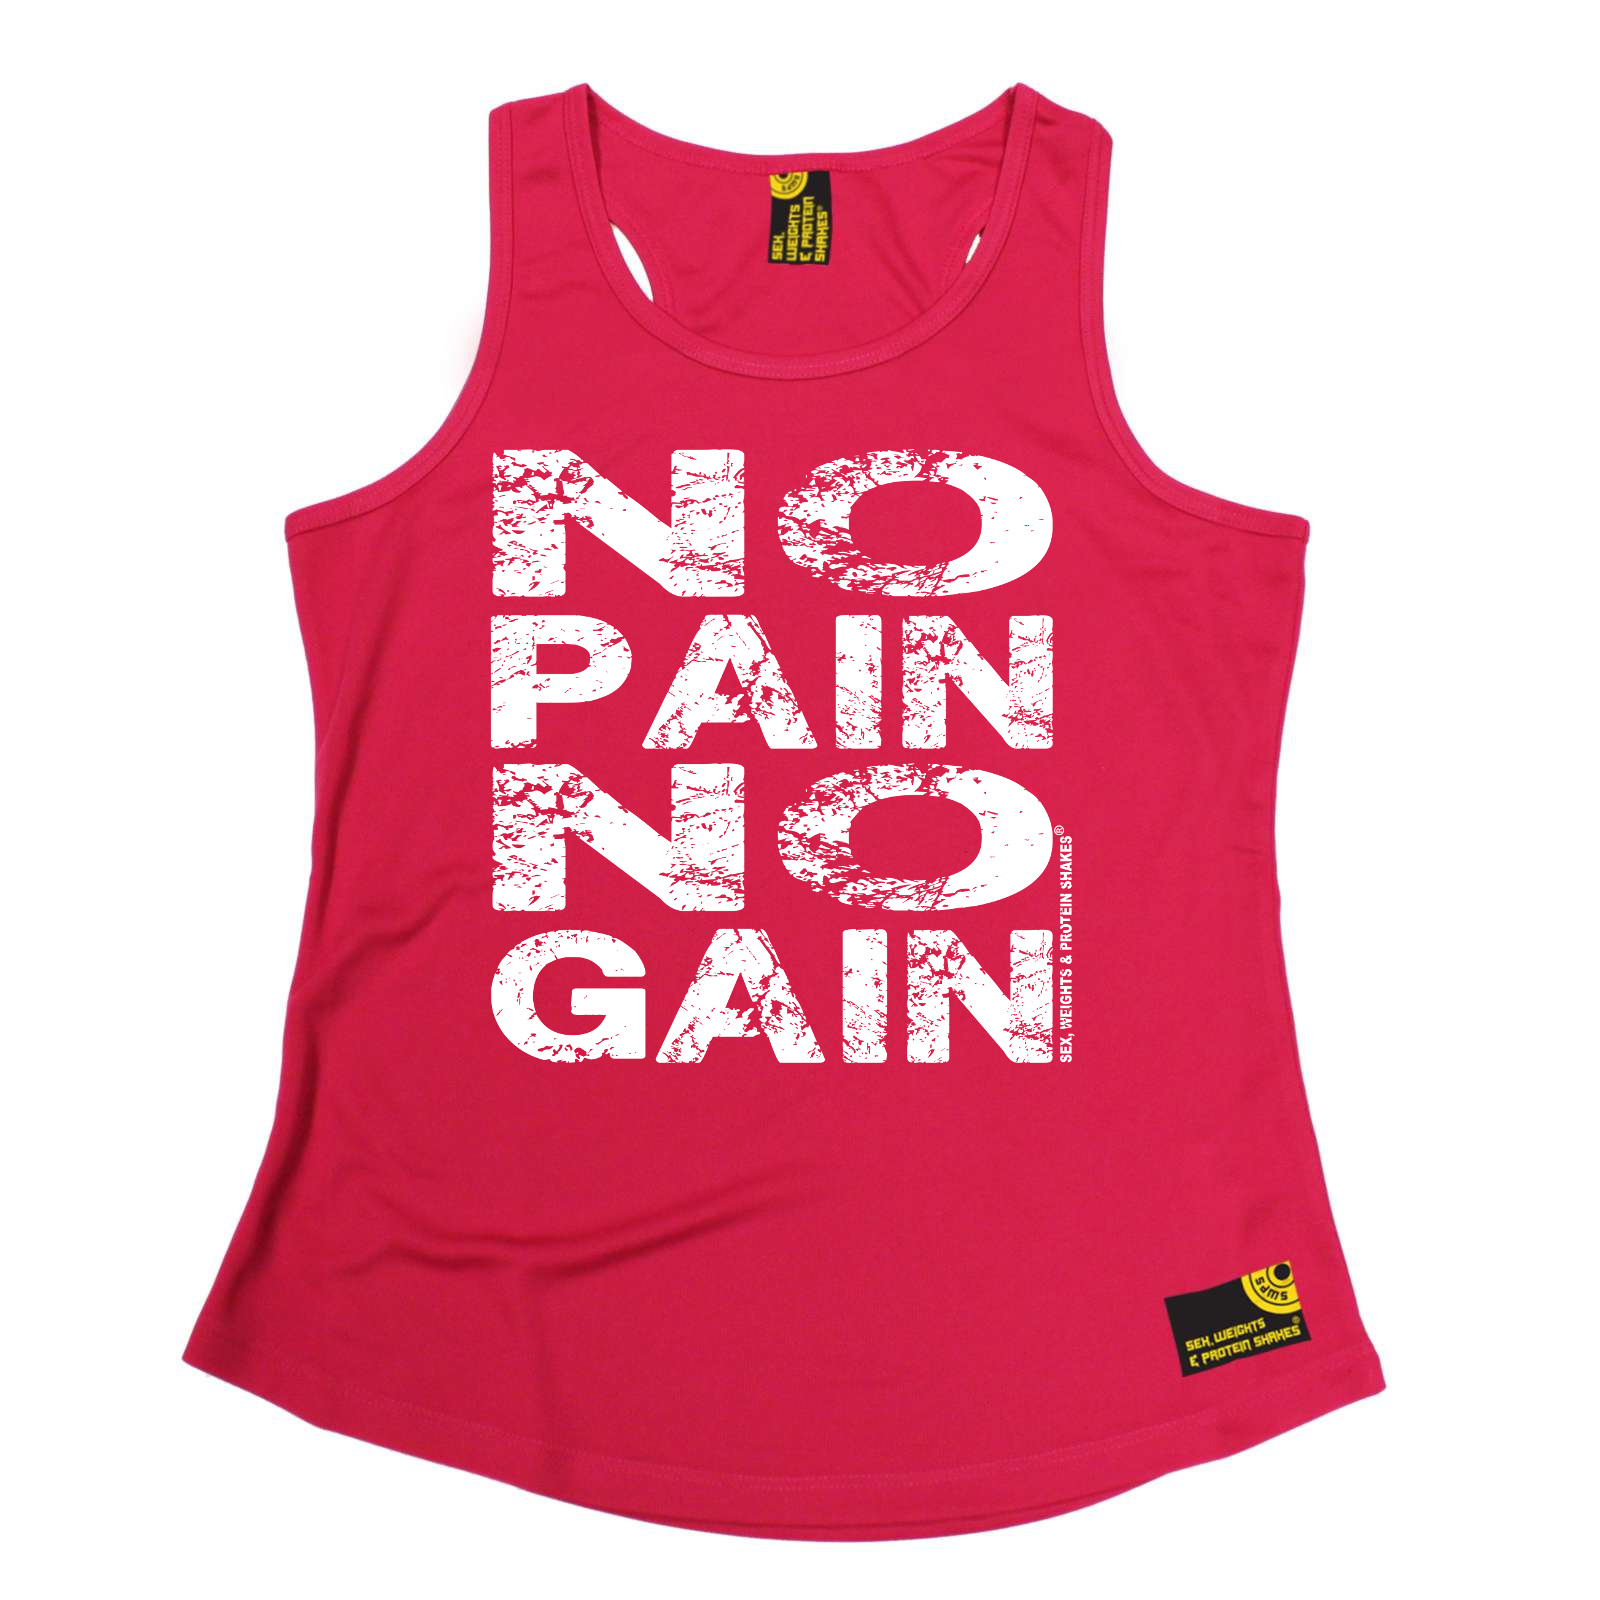 Funny Gym For Women T-Shirts for Sale